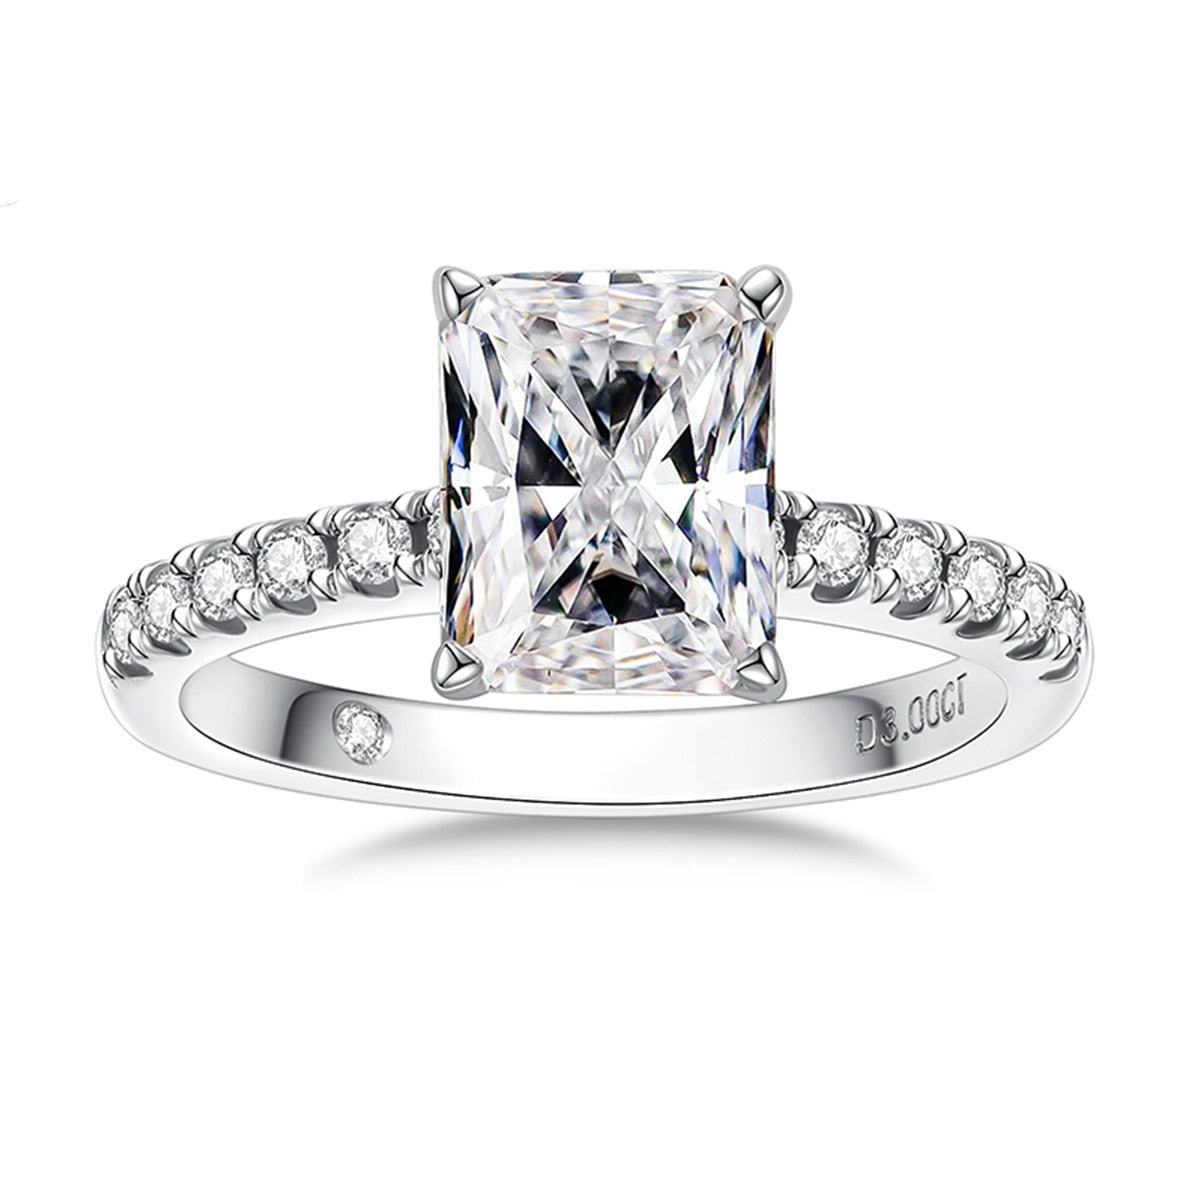 A Moissanite ring with a 3CT radiant cut gem set on a moissanite pave band.